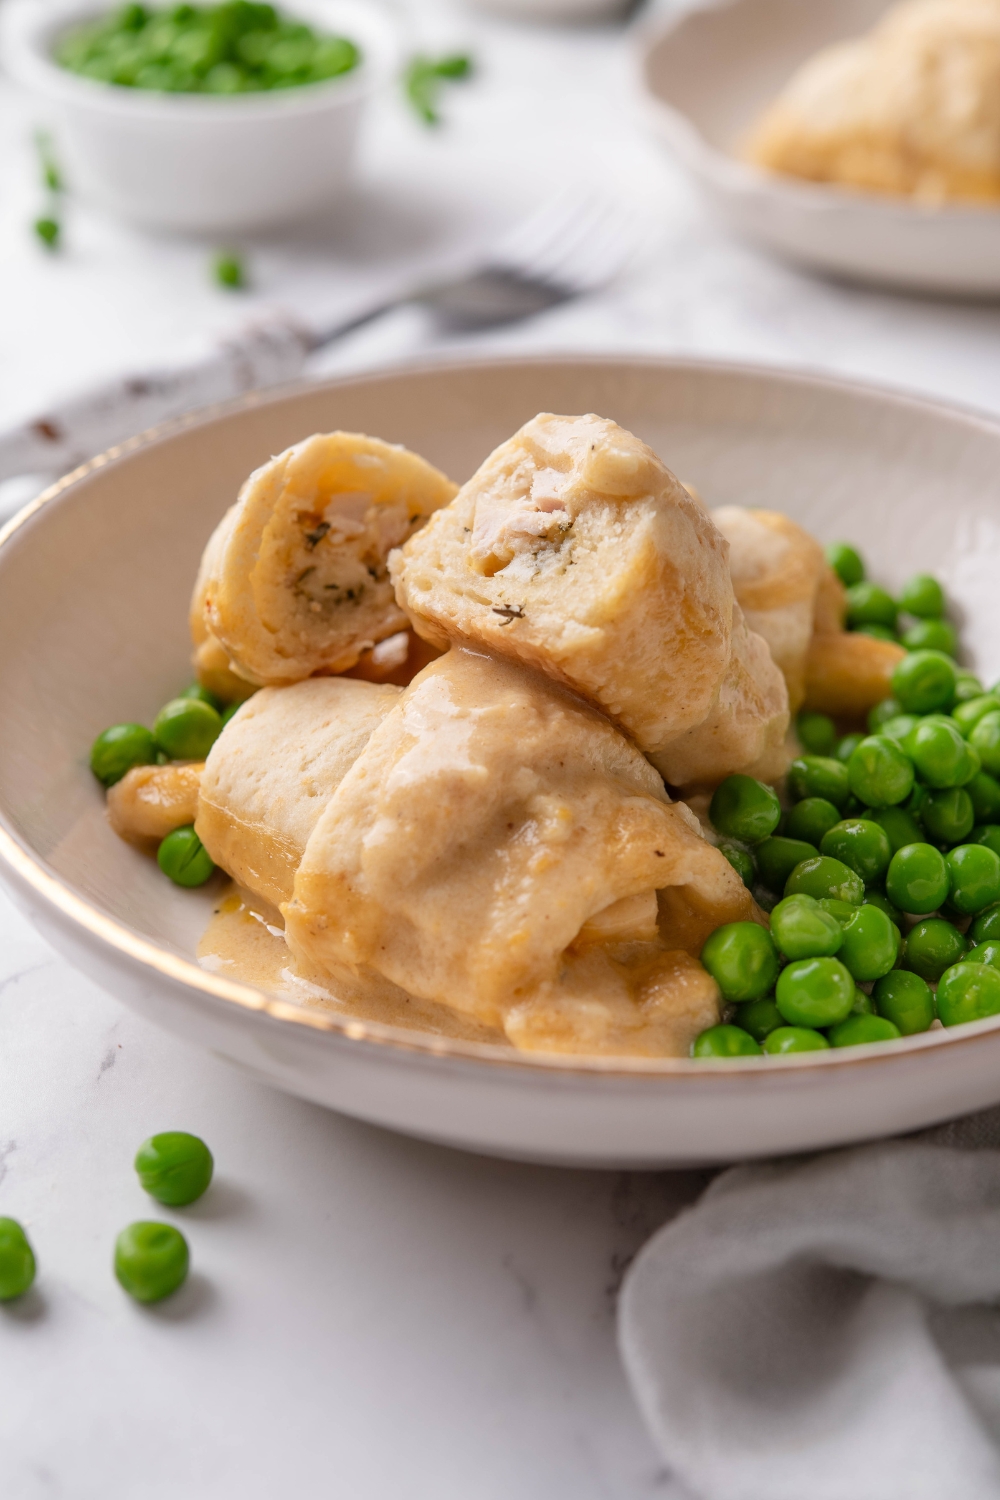 A bowl with three stuffed crescent rolls covered in cream sauce and one crescent roll has been cut in half to reveal the chicken filling. The crescent rolls are served with a side of green peas.